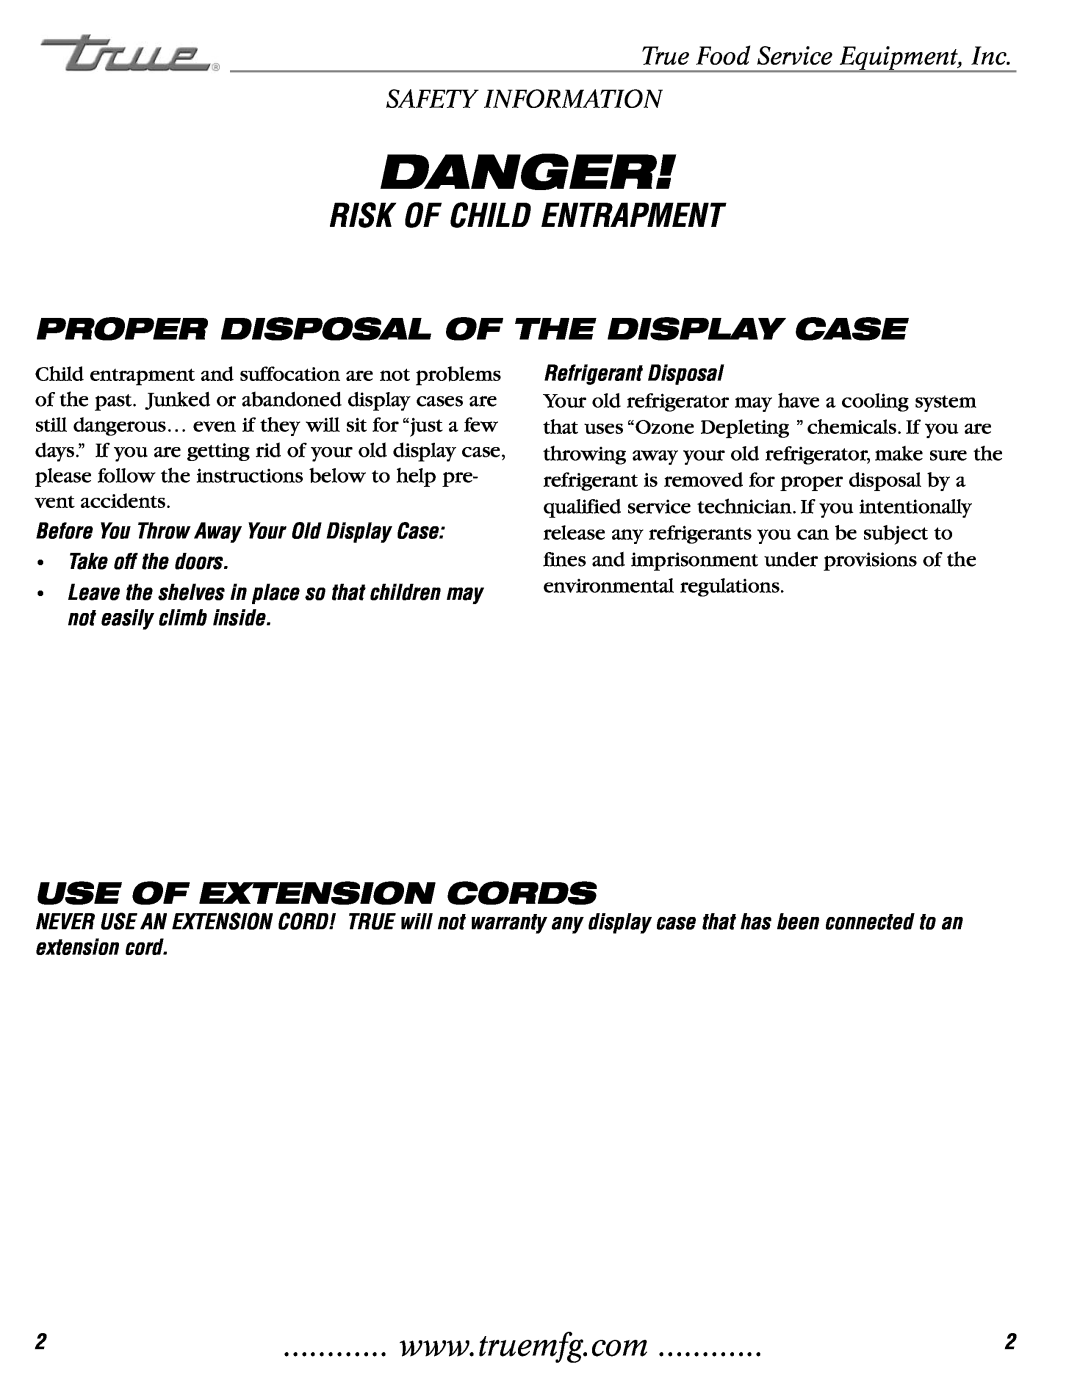 True Manufacturing Company TCGR-77 Proper Disposal Of The Display Case, Use Of Extension Cords, Danger, Safety Information 